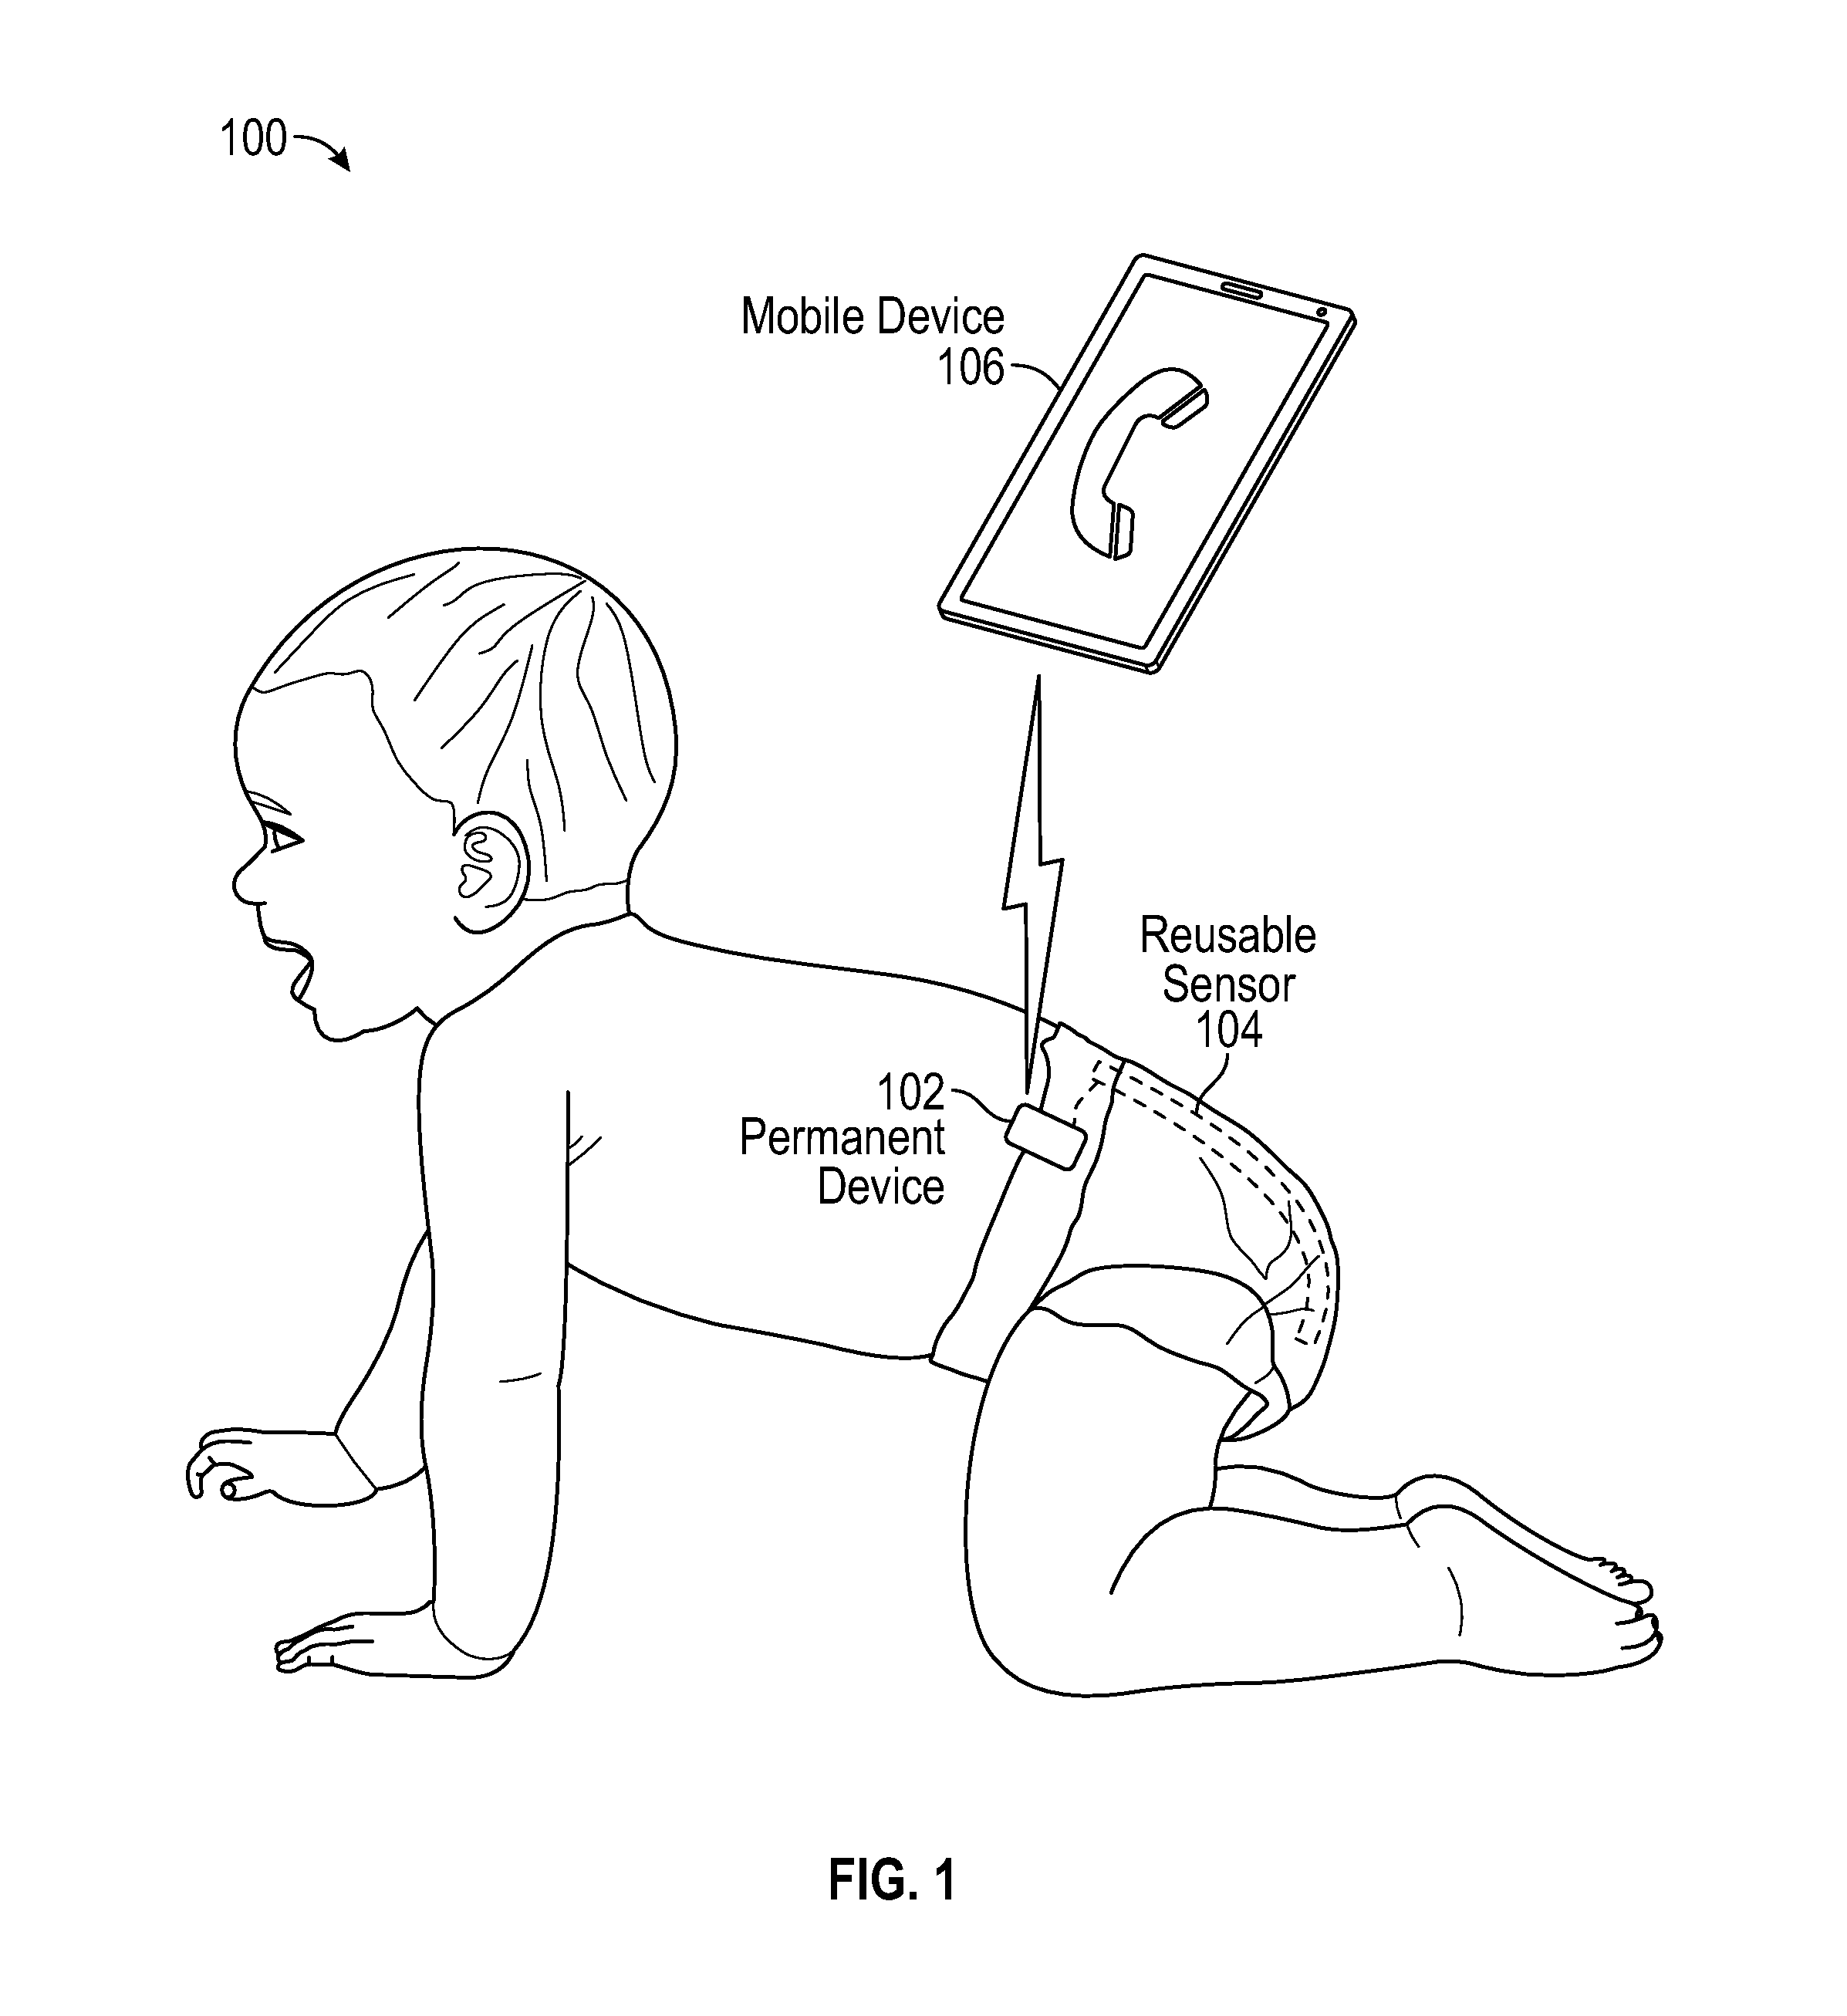 System and methods for monitoring defecation, urination, near-body temperature, body posture and body movements in young children, patients and elderlies